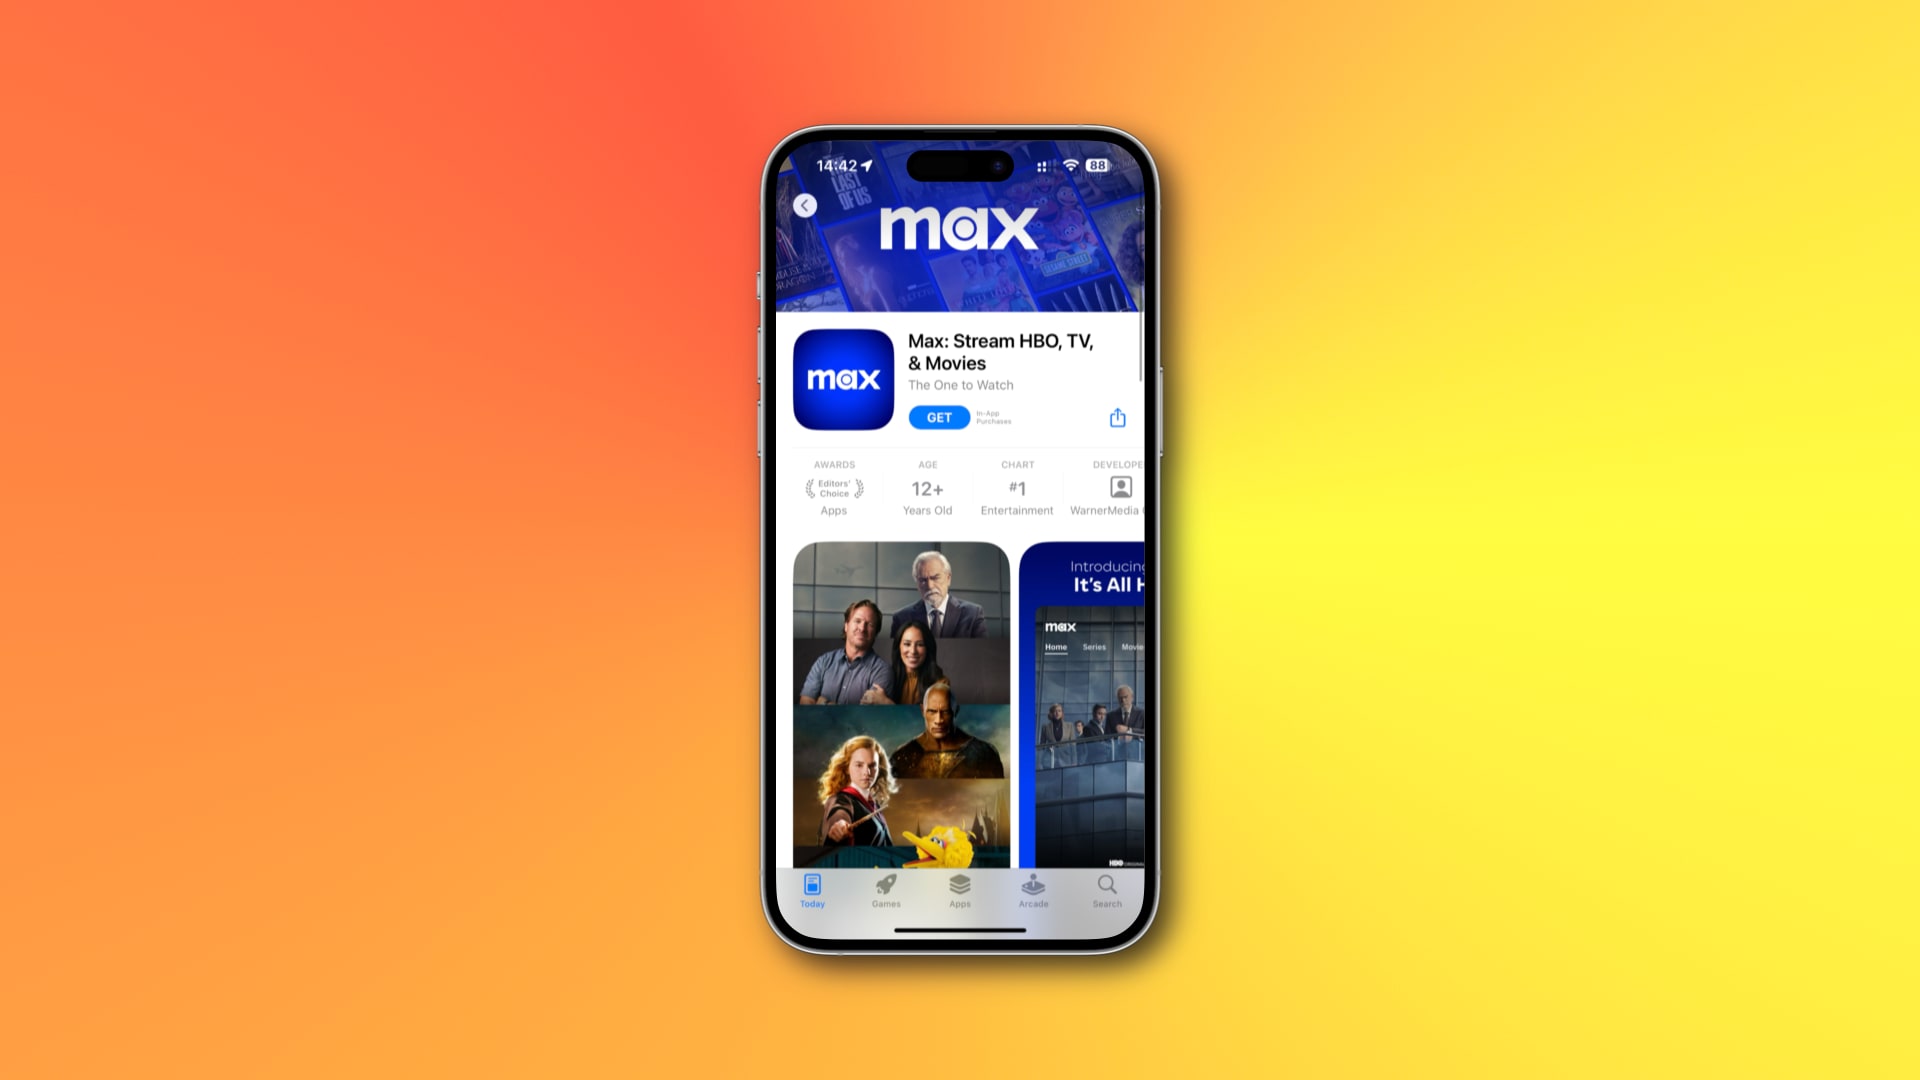 iPhone screenshot showing the Max streaming app on the App Store